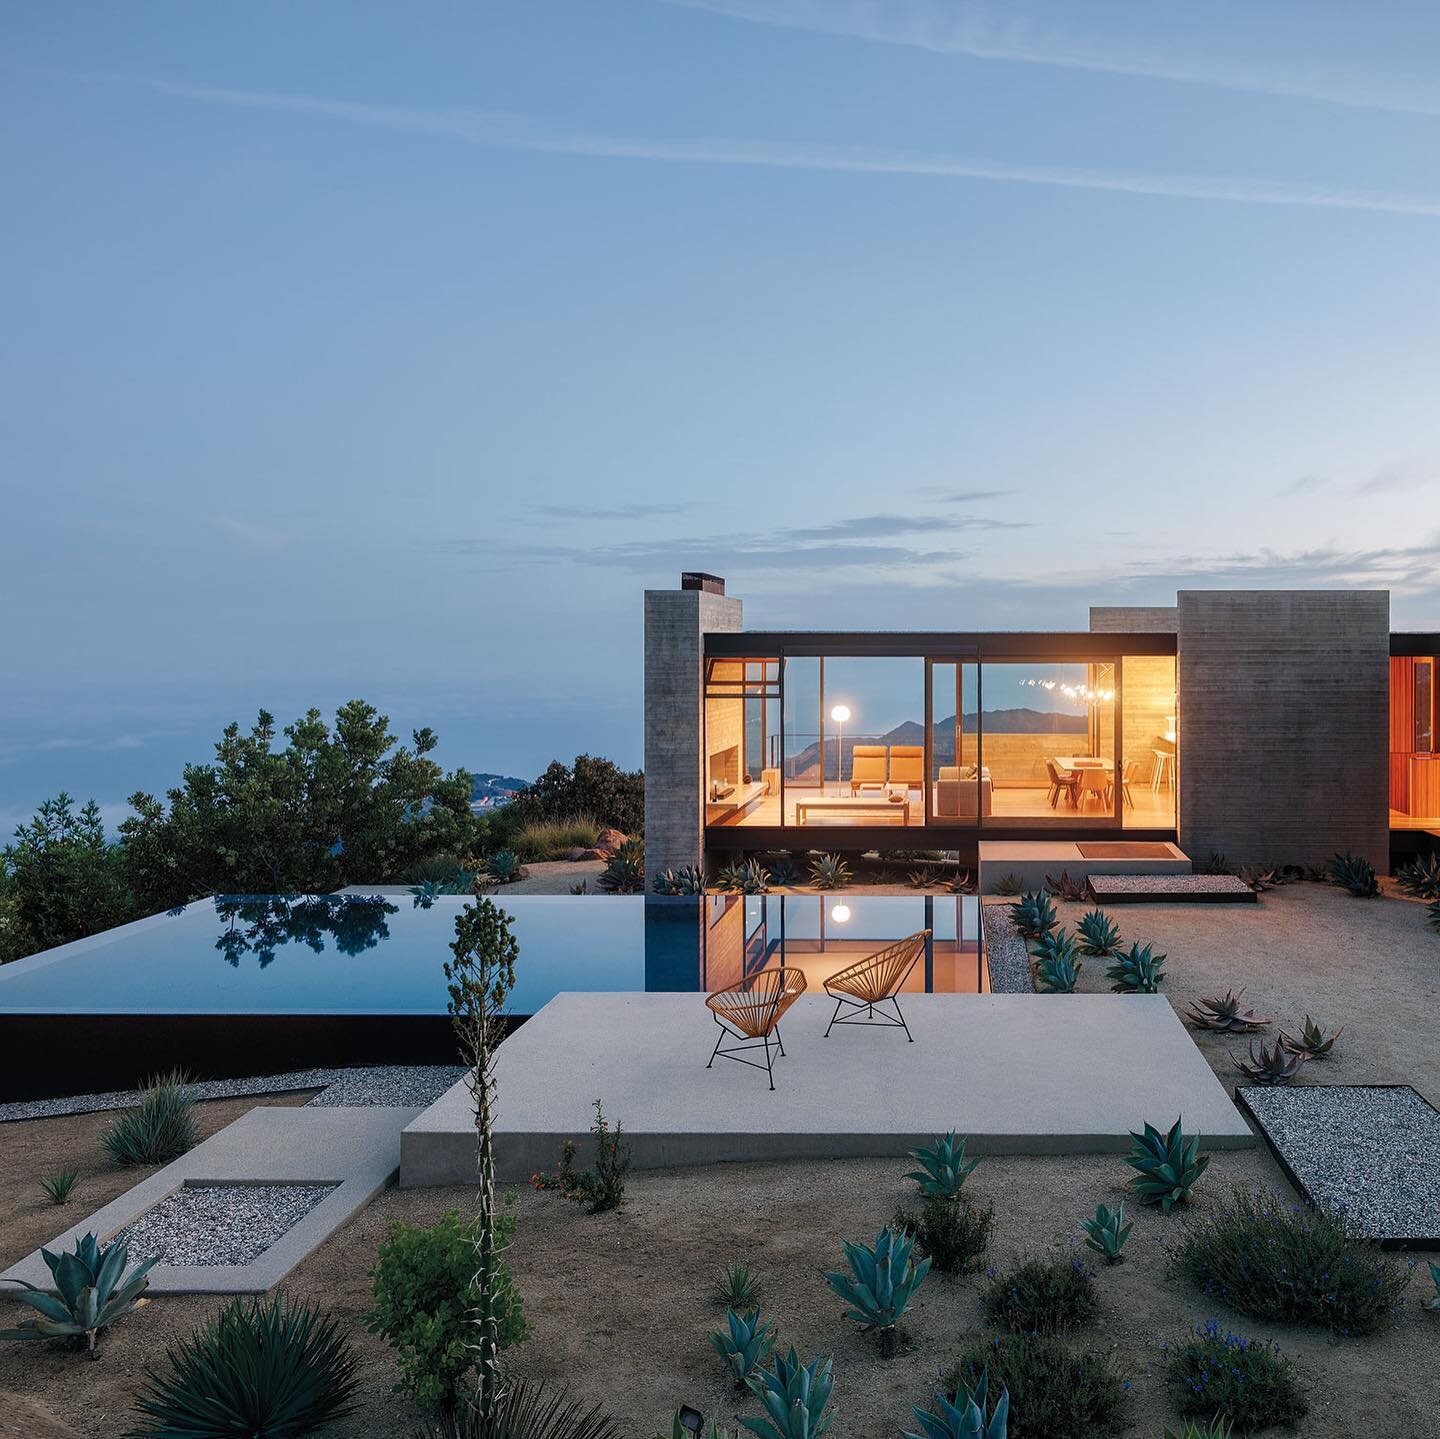 Breathtaking work from Sant Architects.  This insane home was literally built into a boulder strewn site in Topanga Canyon, with awe inspiring views to the Pacific Ocean and the Santa Monica Mountains. 
📸 Joe Fletcher

#amazingarchitecture  #environ